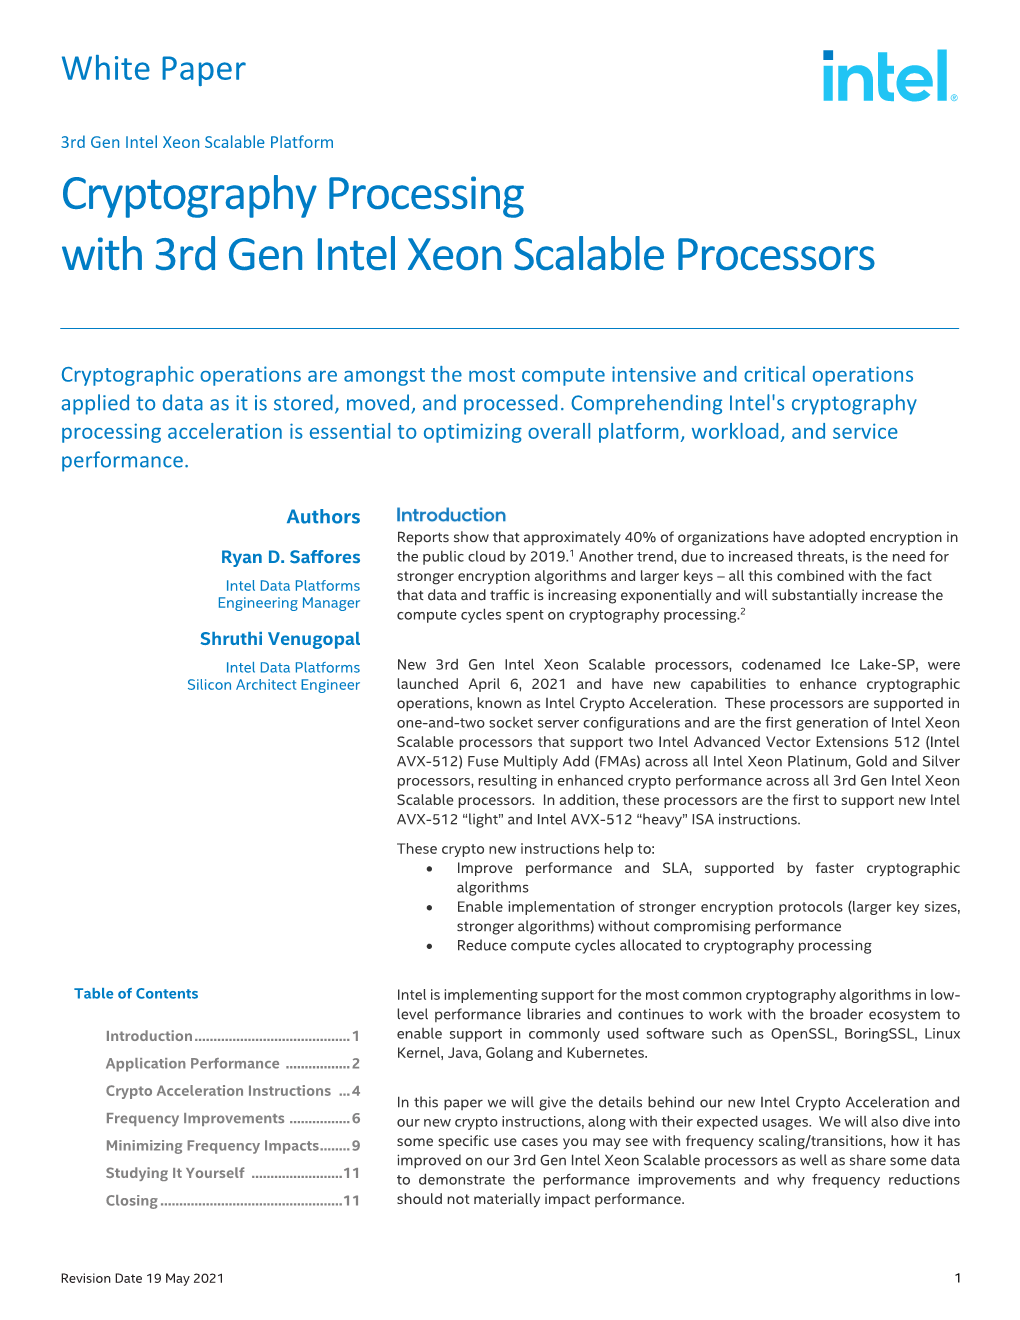 Cryptography Processing with 3Rd Gen Intel Xeon Scalable Processors